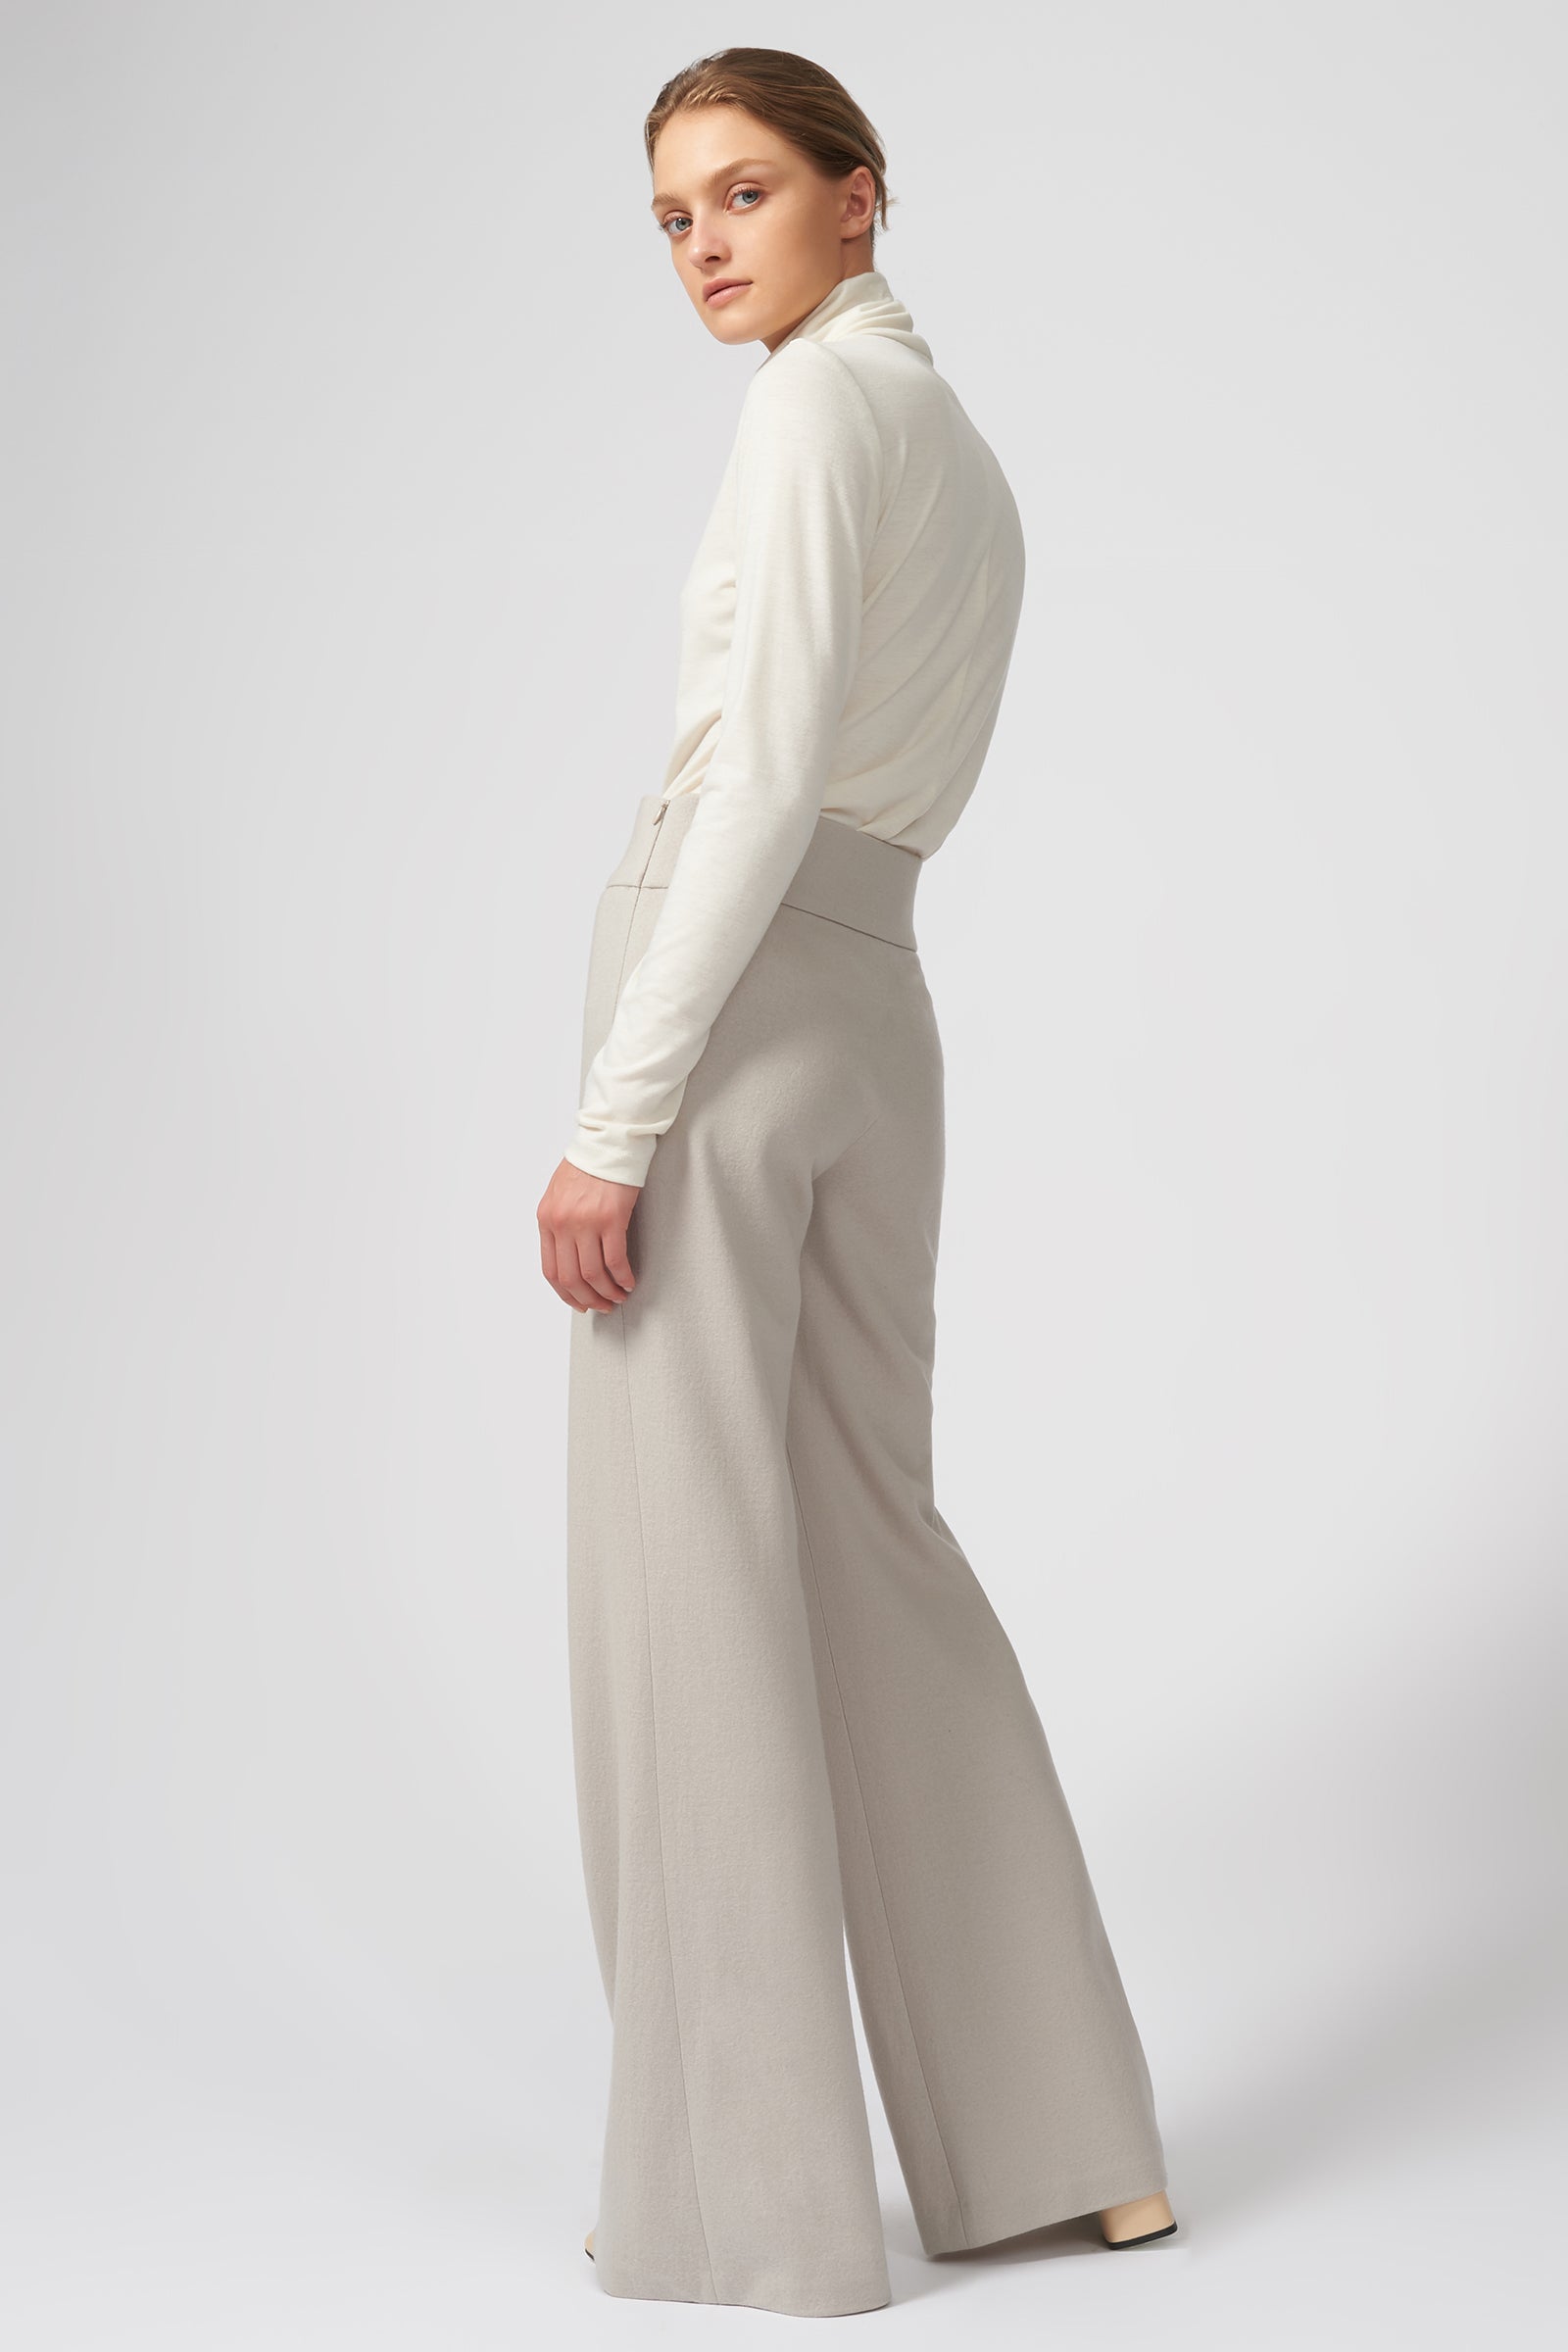 Kal Rieman Felted Jersey Wide Leg Pant in Mink on Model Full Front View